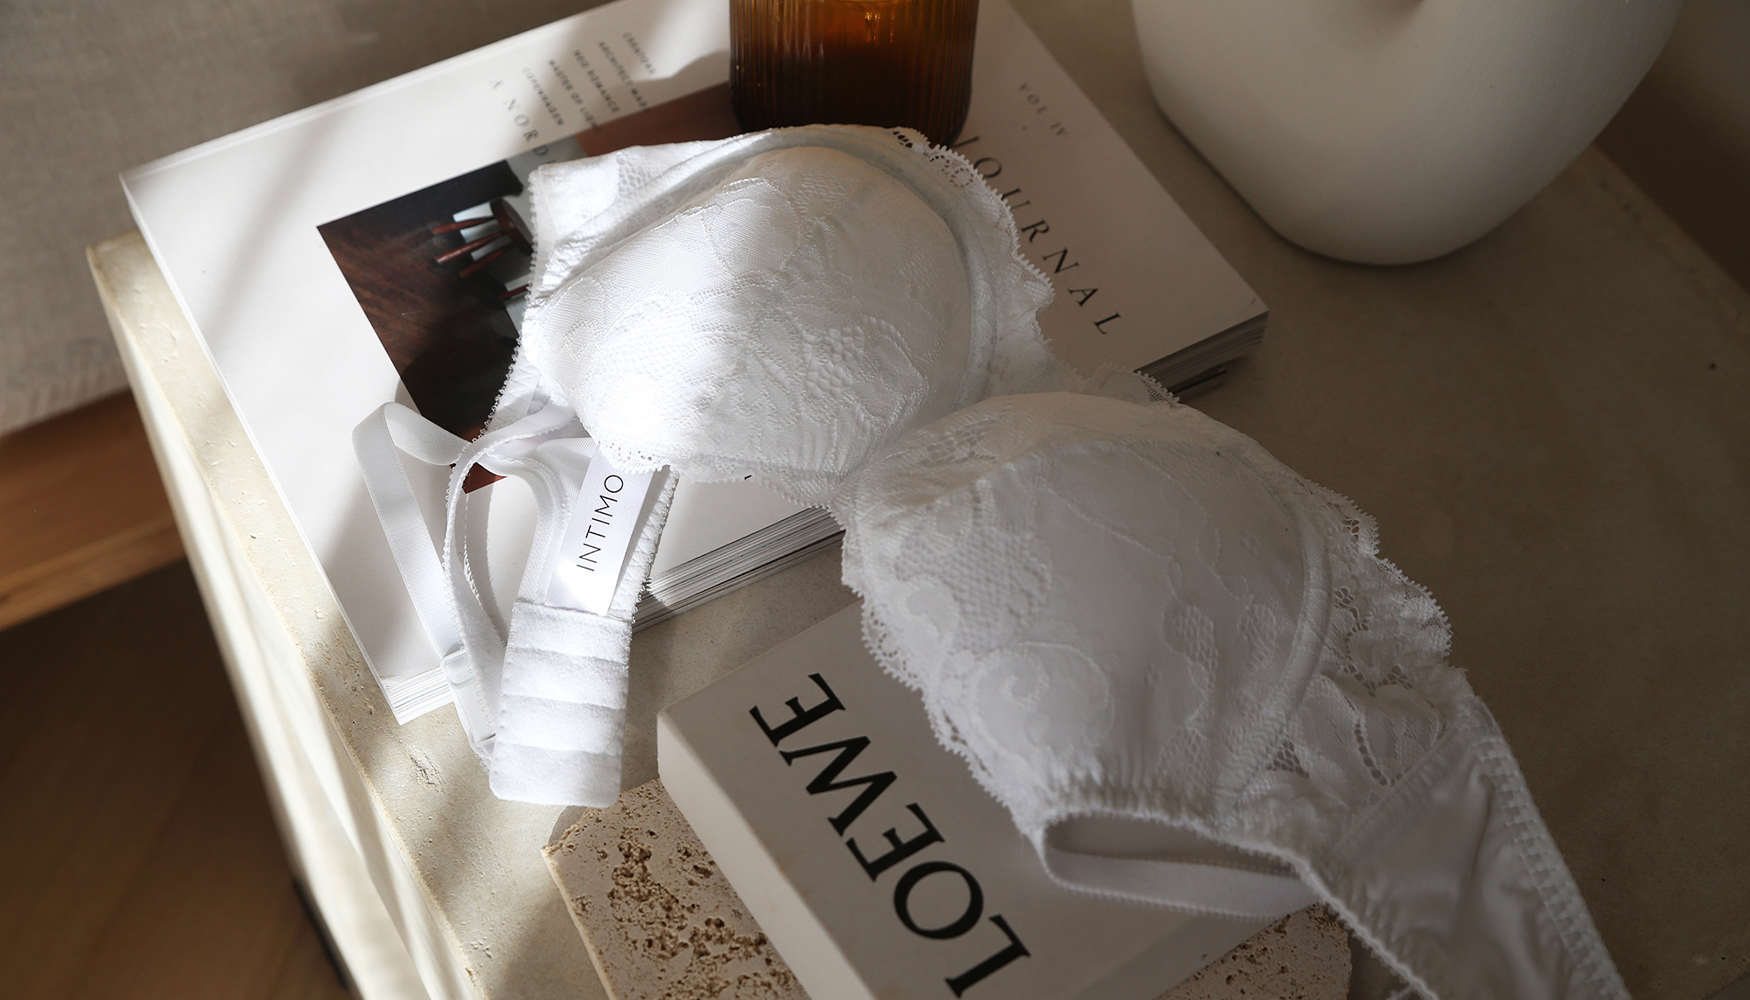 Bra and books; lifestyle photography by Erin Maxwell.